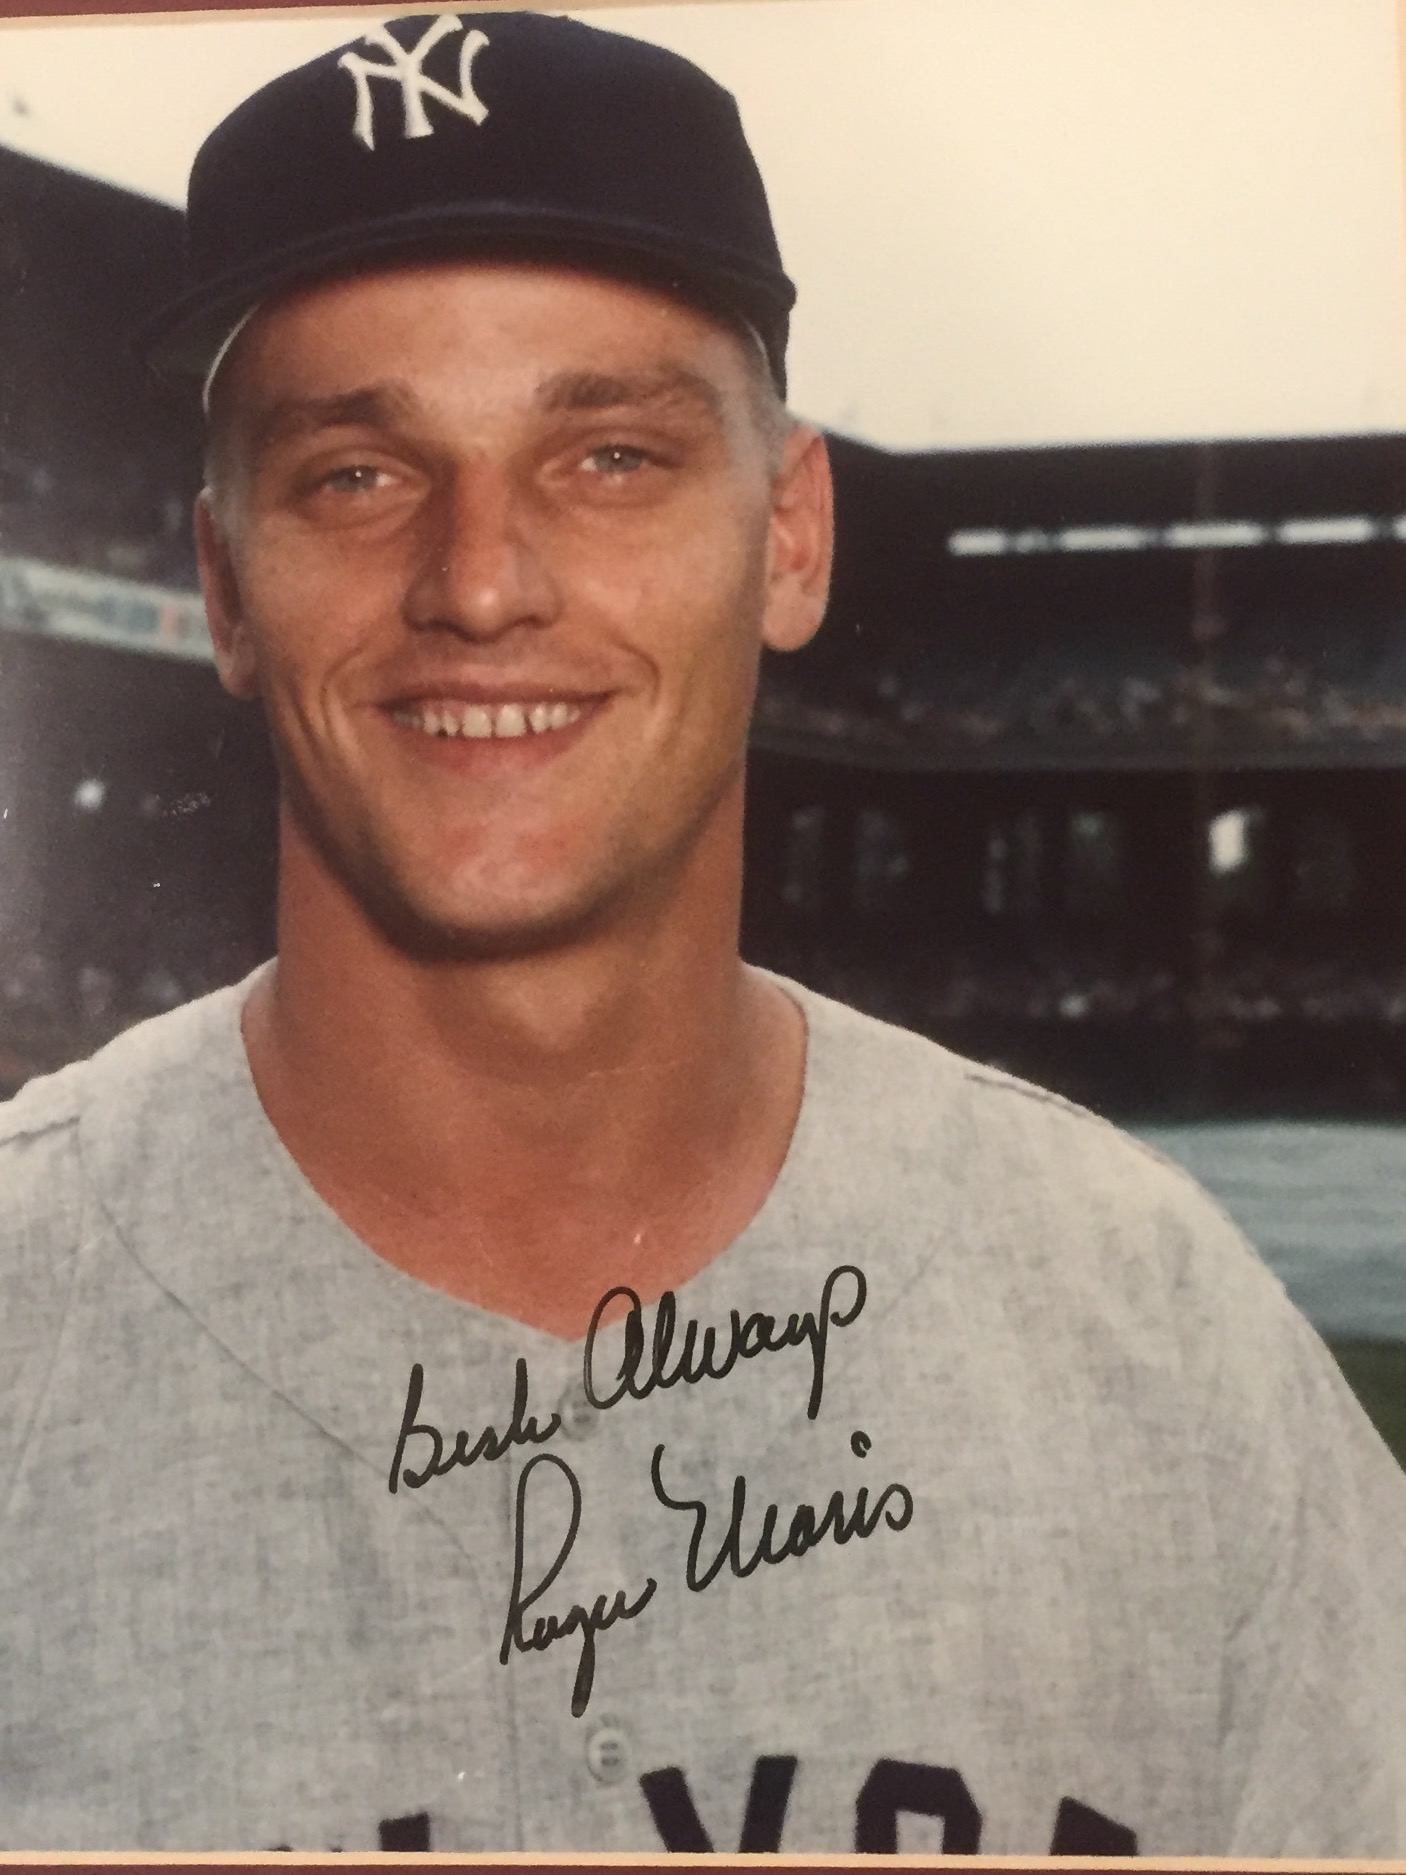 Roger Maris - from zero intentional walks one season to four in